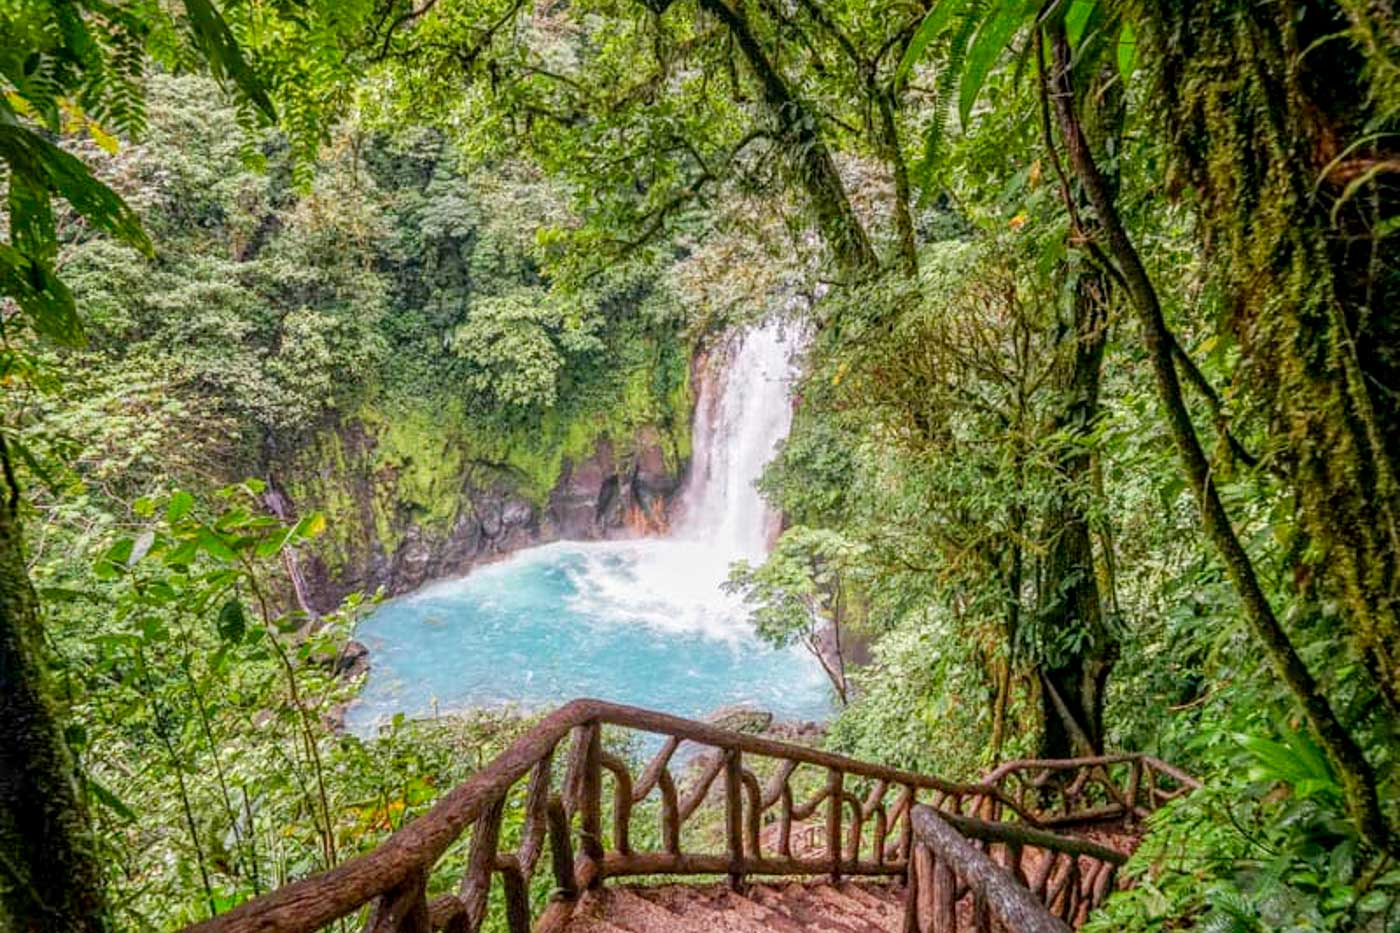 View of Rio Celeste Waterfall from the stairs in the forest.